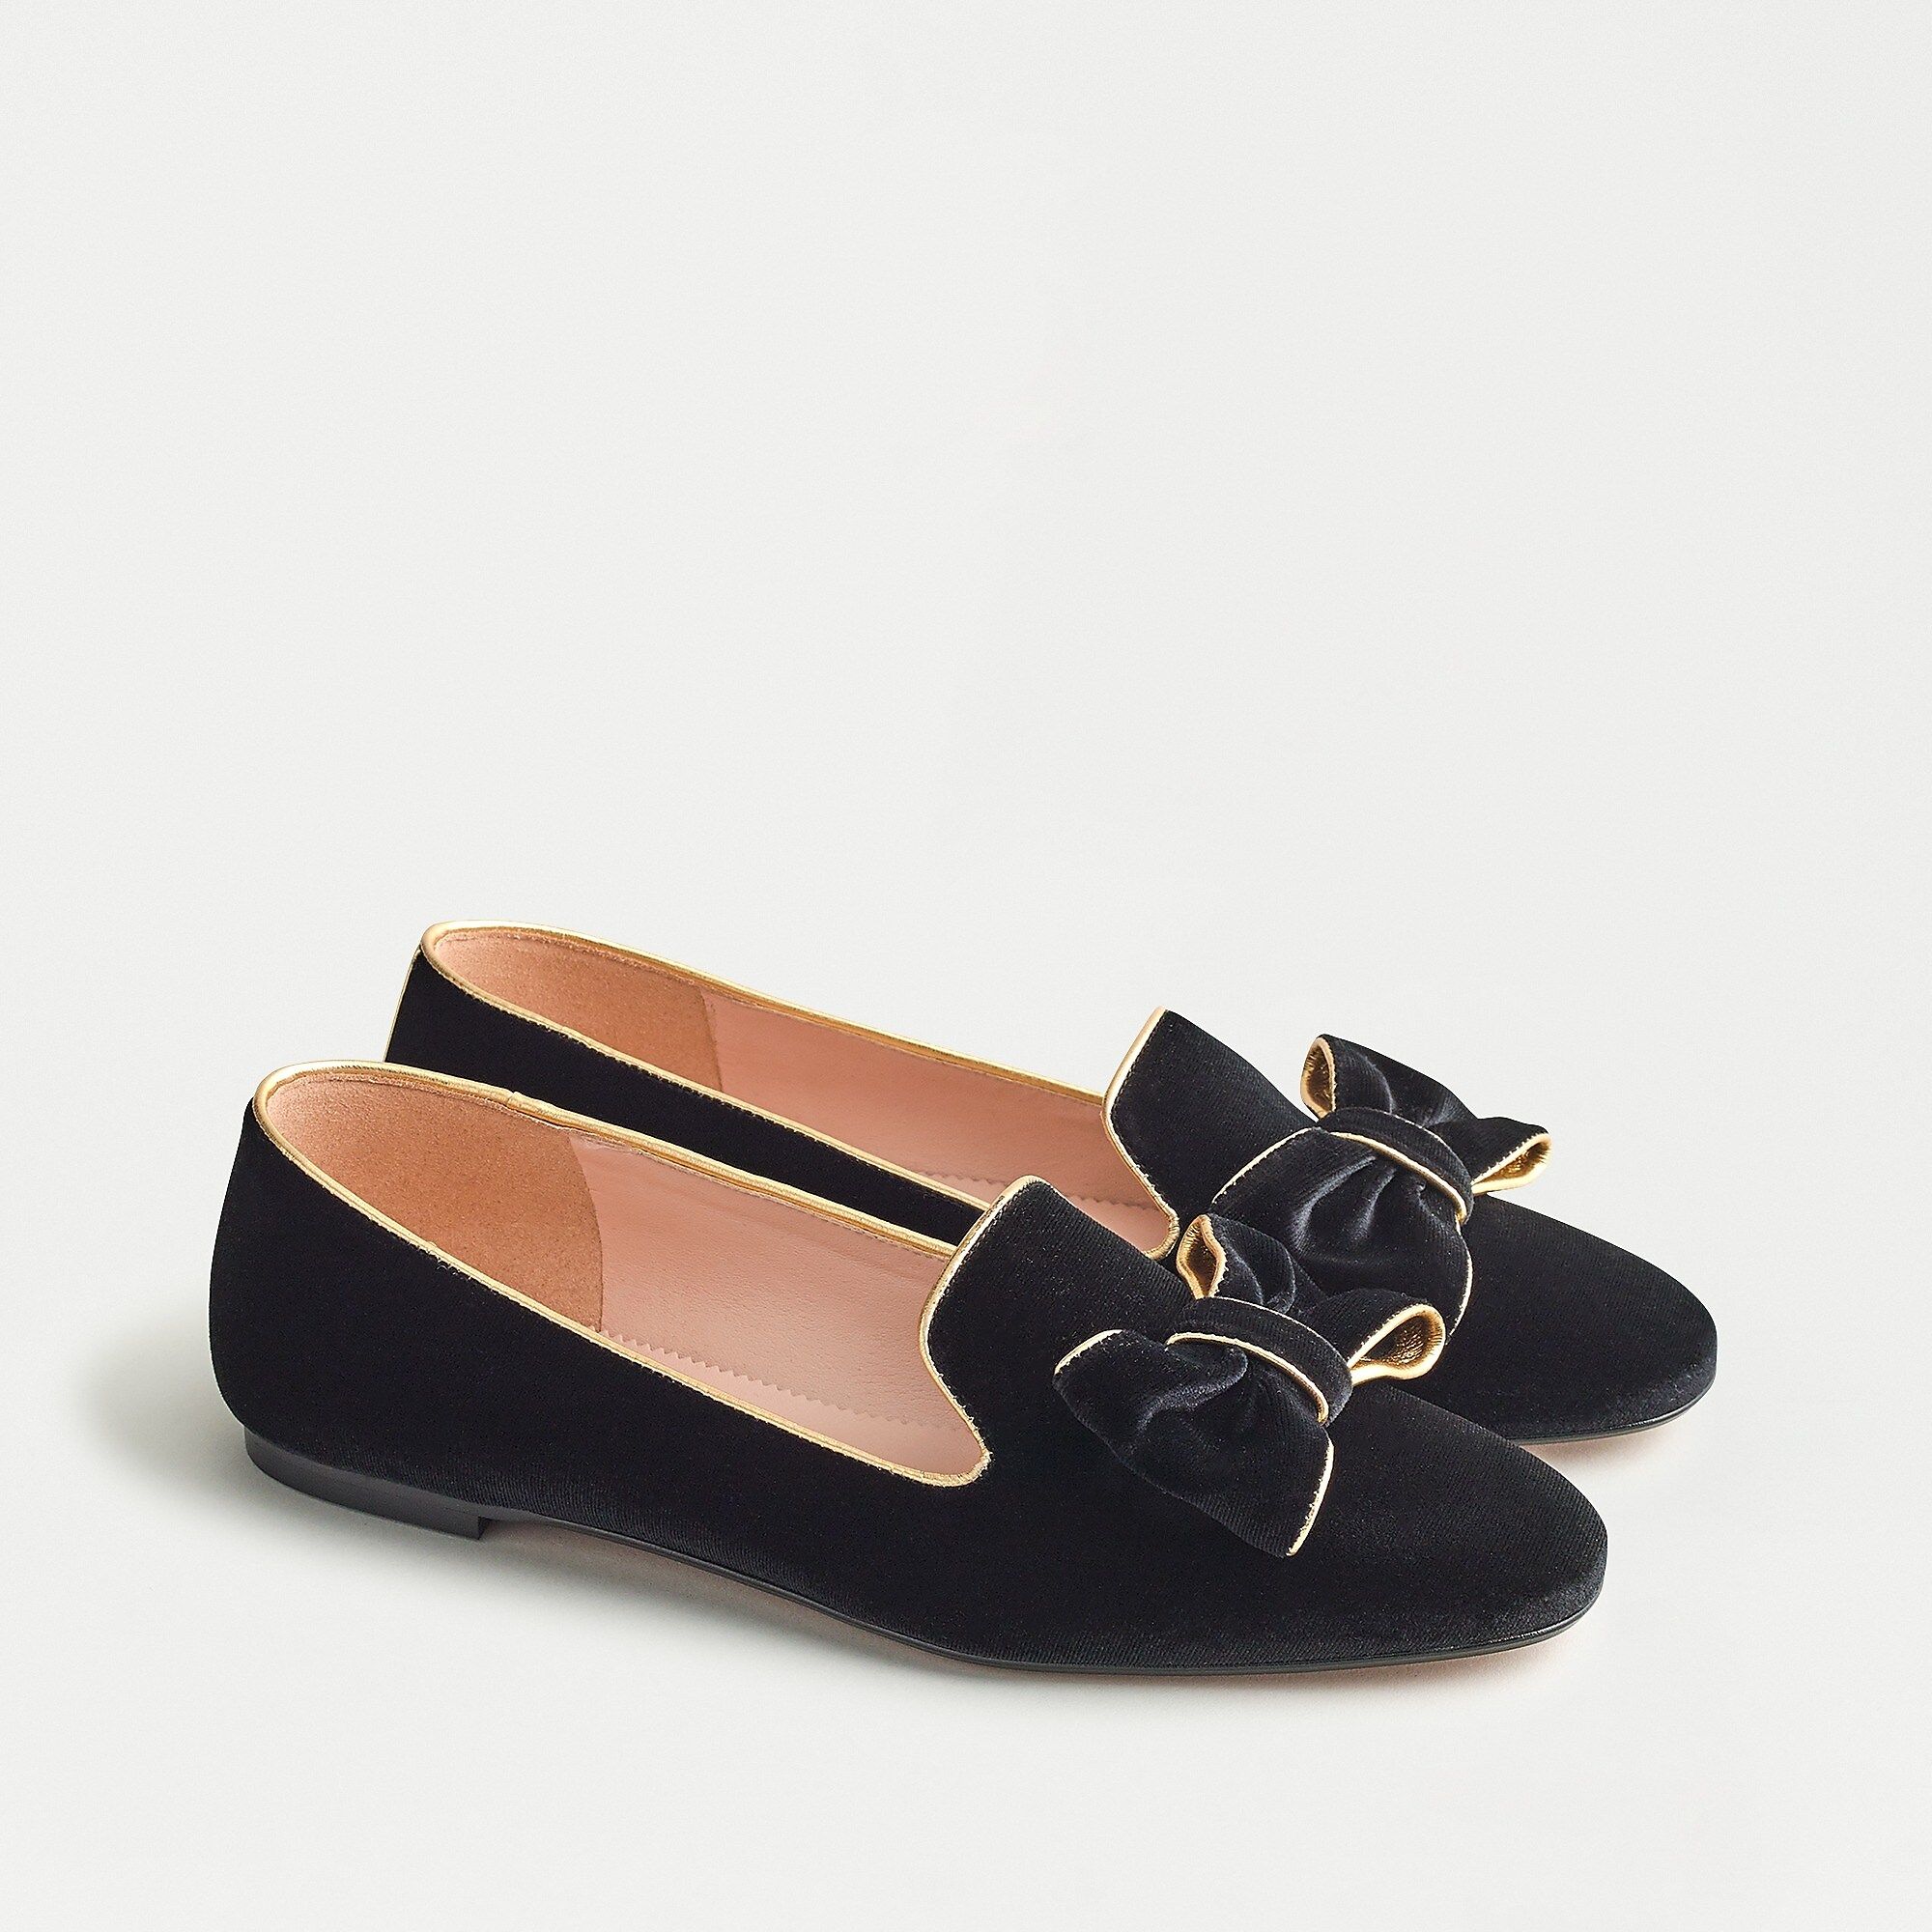 Velvet smoking slippers with bow detail | J.Crew US